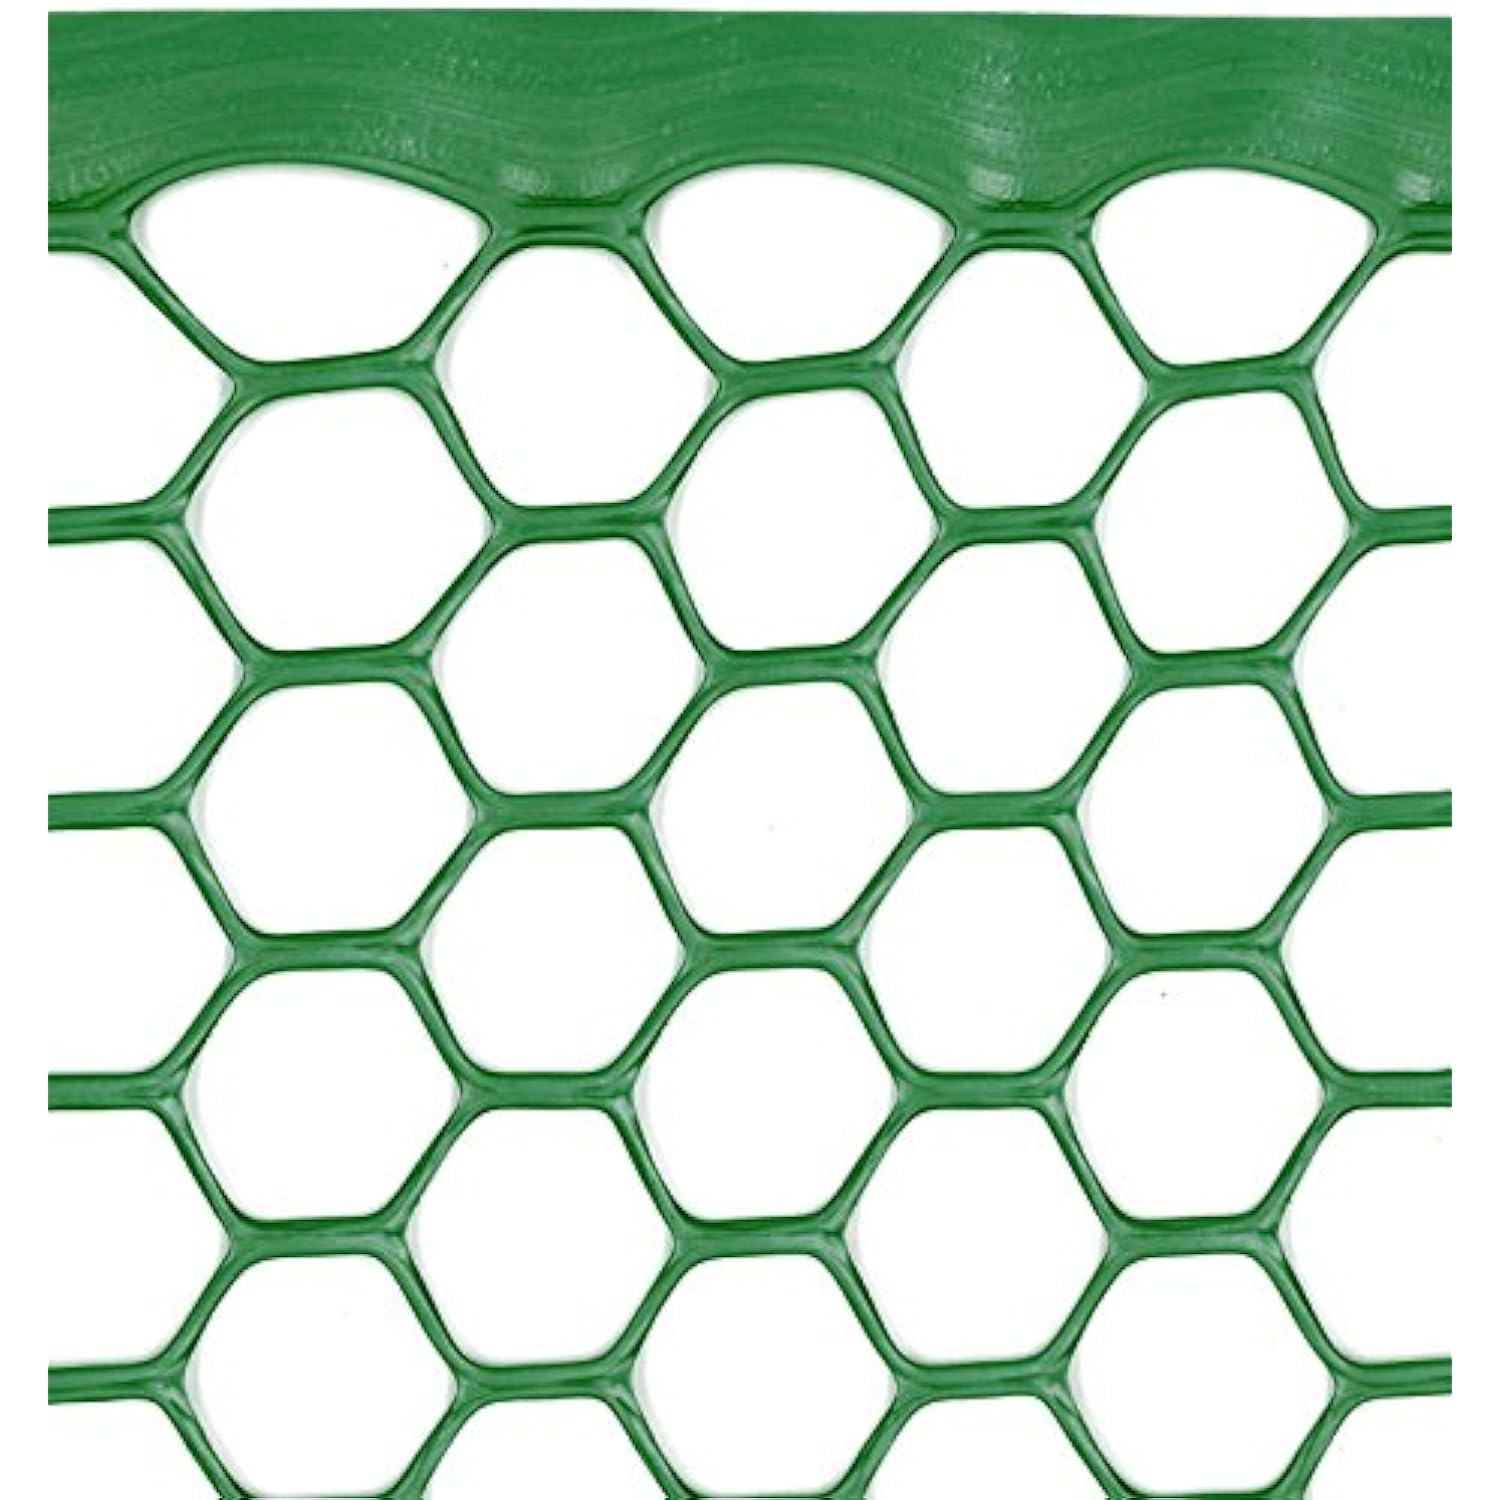 Tenax 72121128 Livestock Fences 3ft. x 25ft. Green Poultry Netting/Chicken Wire - image 2 of 4